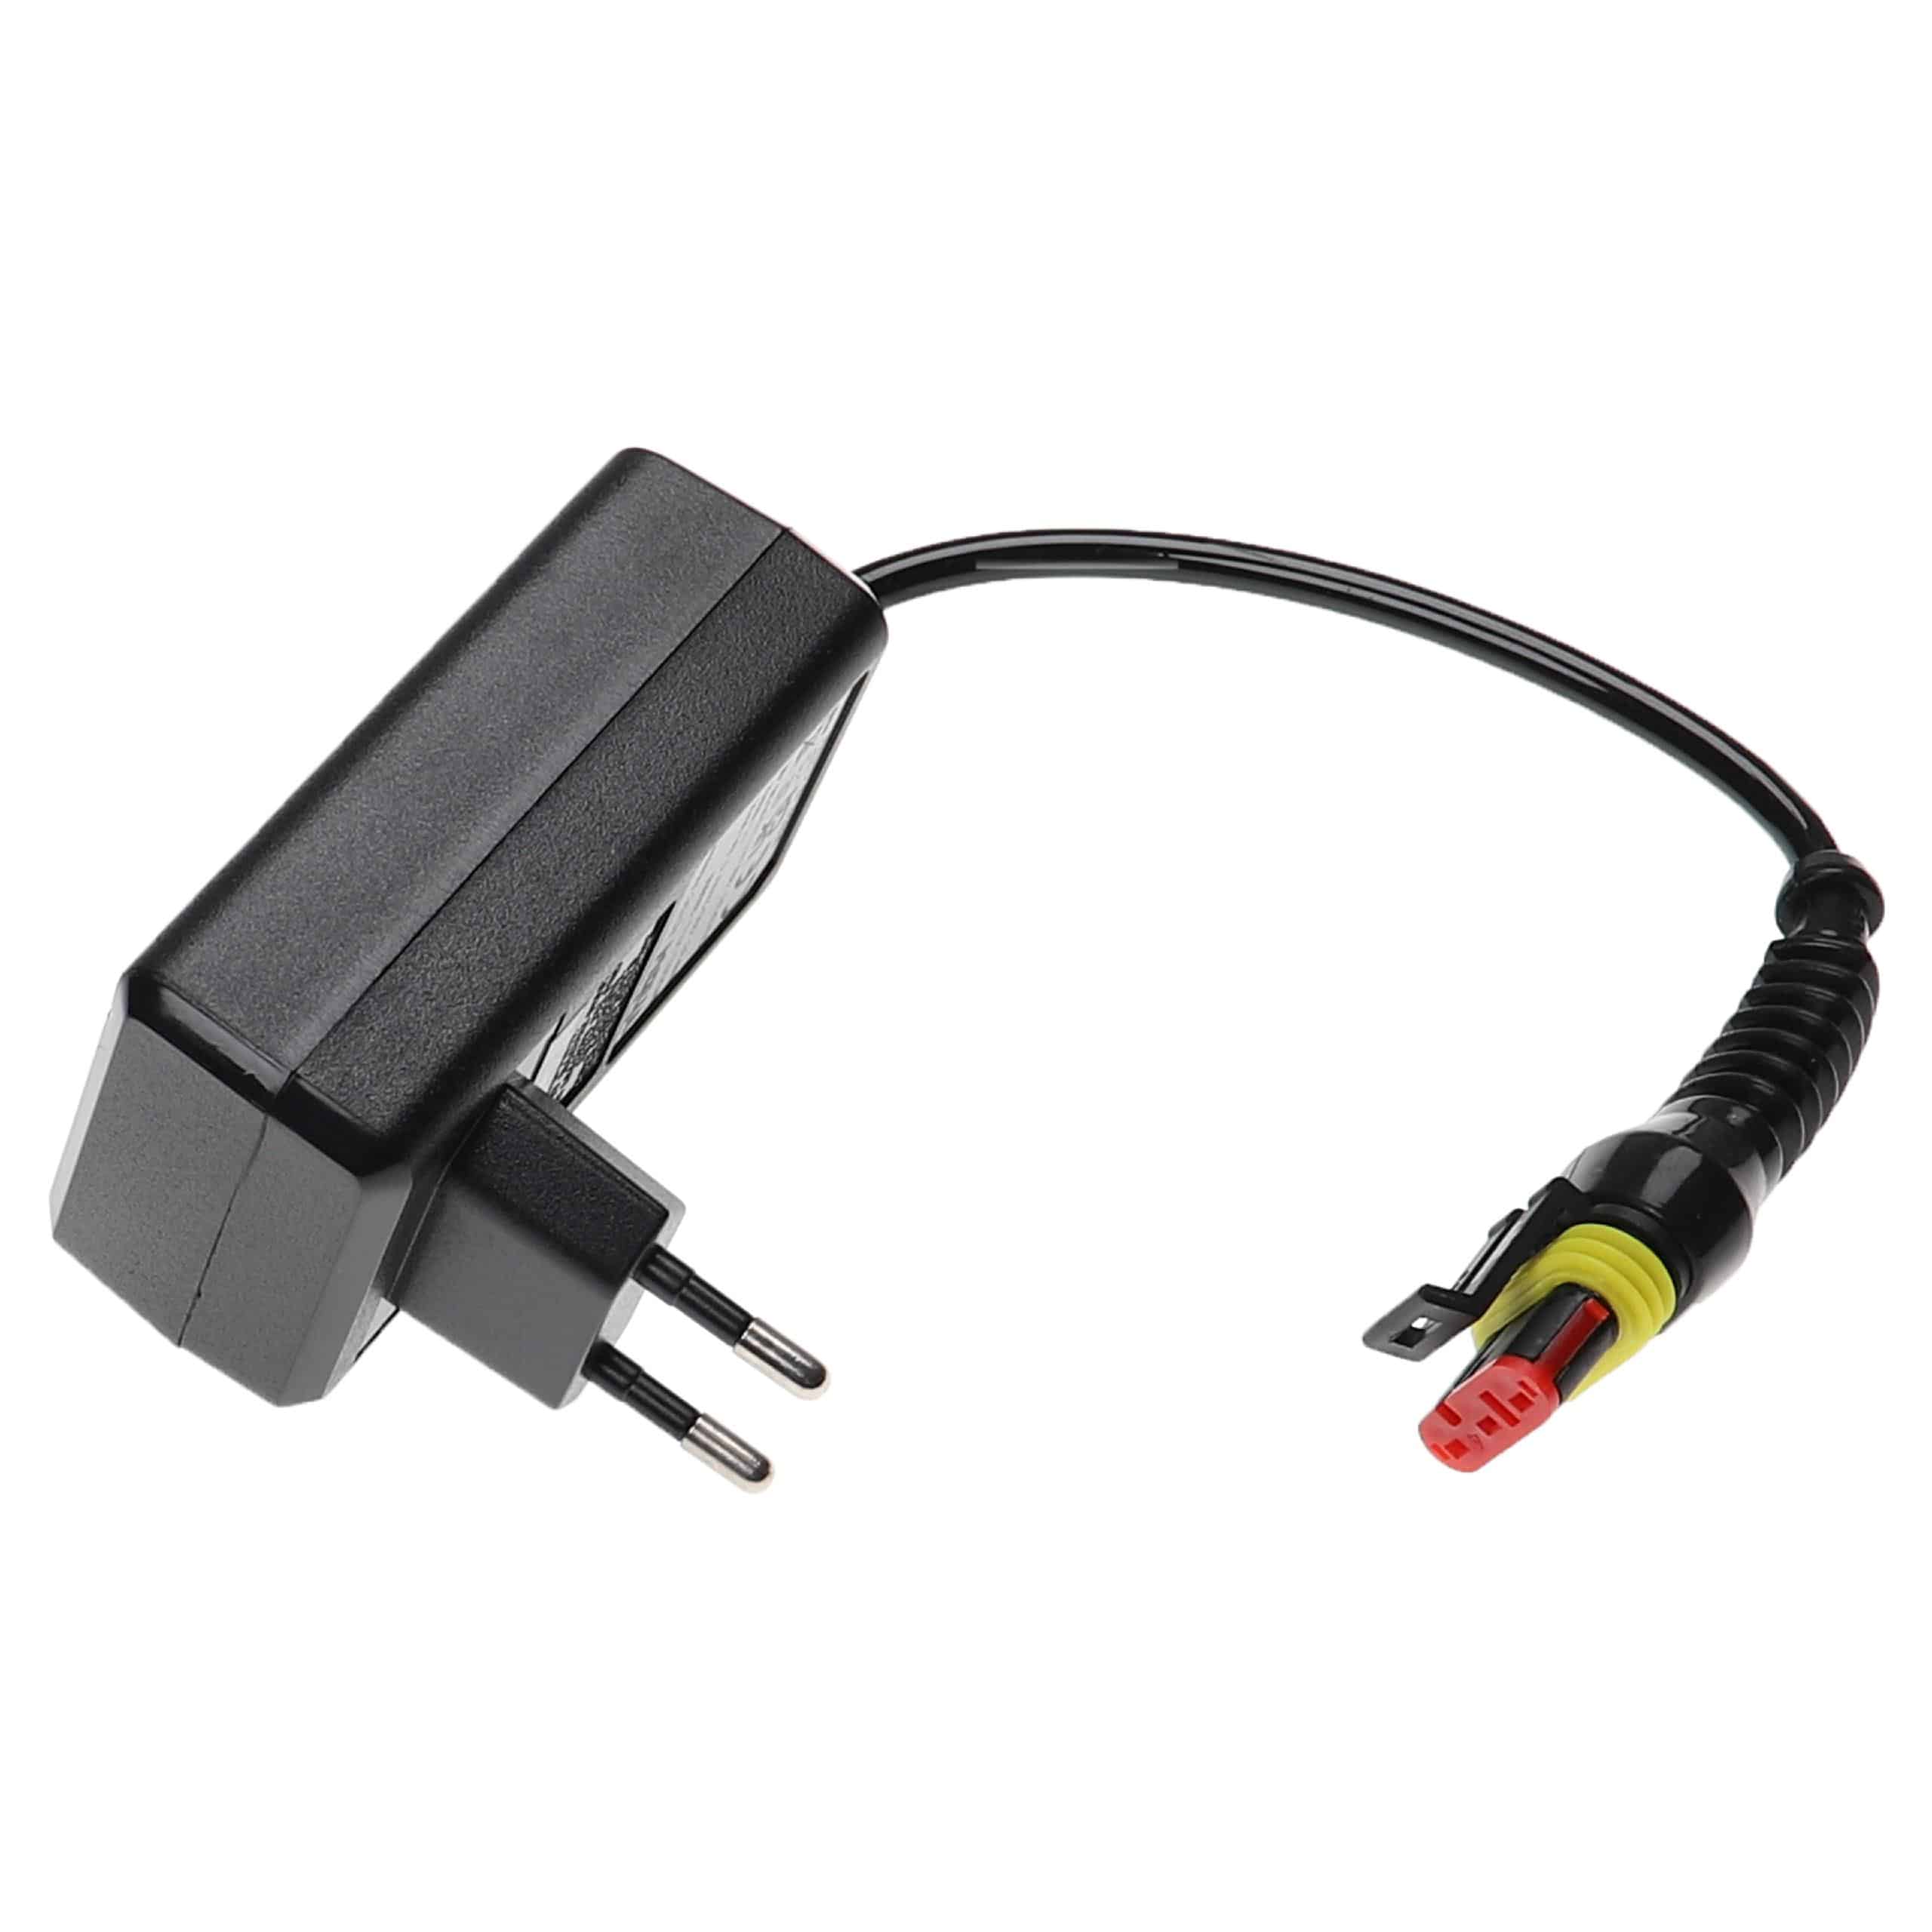 Mains Power Adapter replaces 5931636-01 for McCulloch Robot Lawn Mower Charging Station etc.